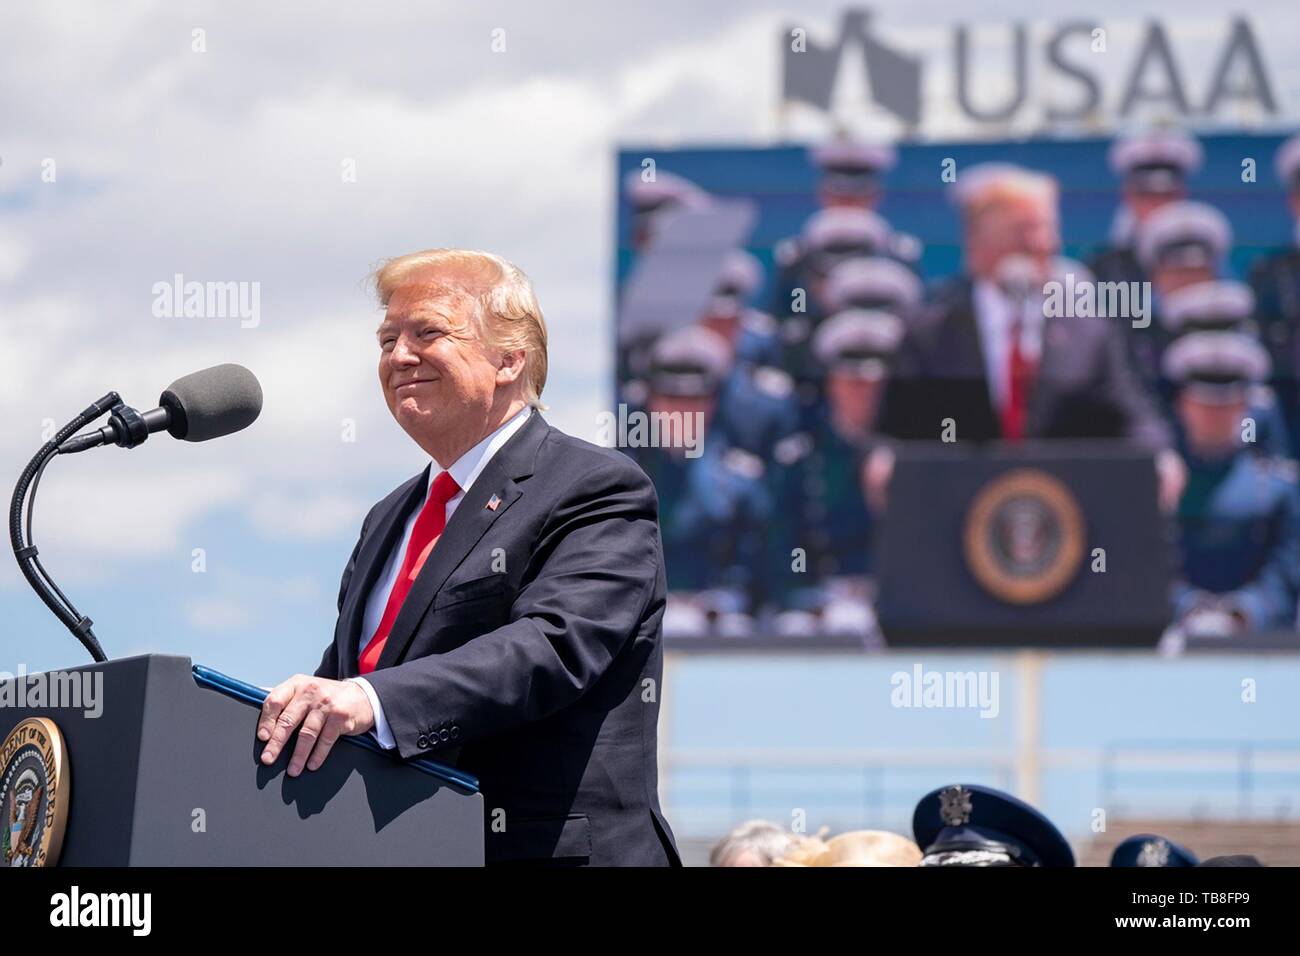 U.S President Donald Trump delivers remarks during the U.S. Air Force Academy Graduation Ceremony at the USAF Academy Falcon Stadium May 30, 2019 in Colorado Springs, Colorado. Credit: Planetpix/Alamy Live News Stock Photo